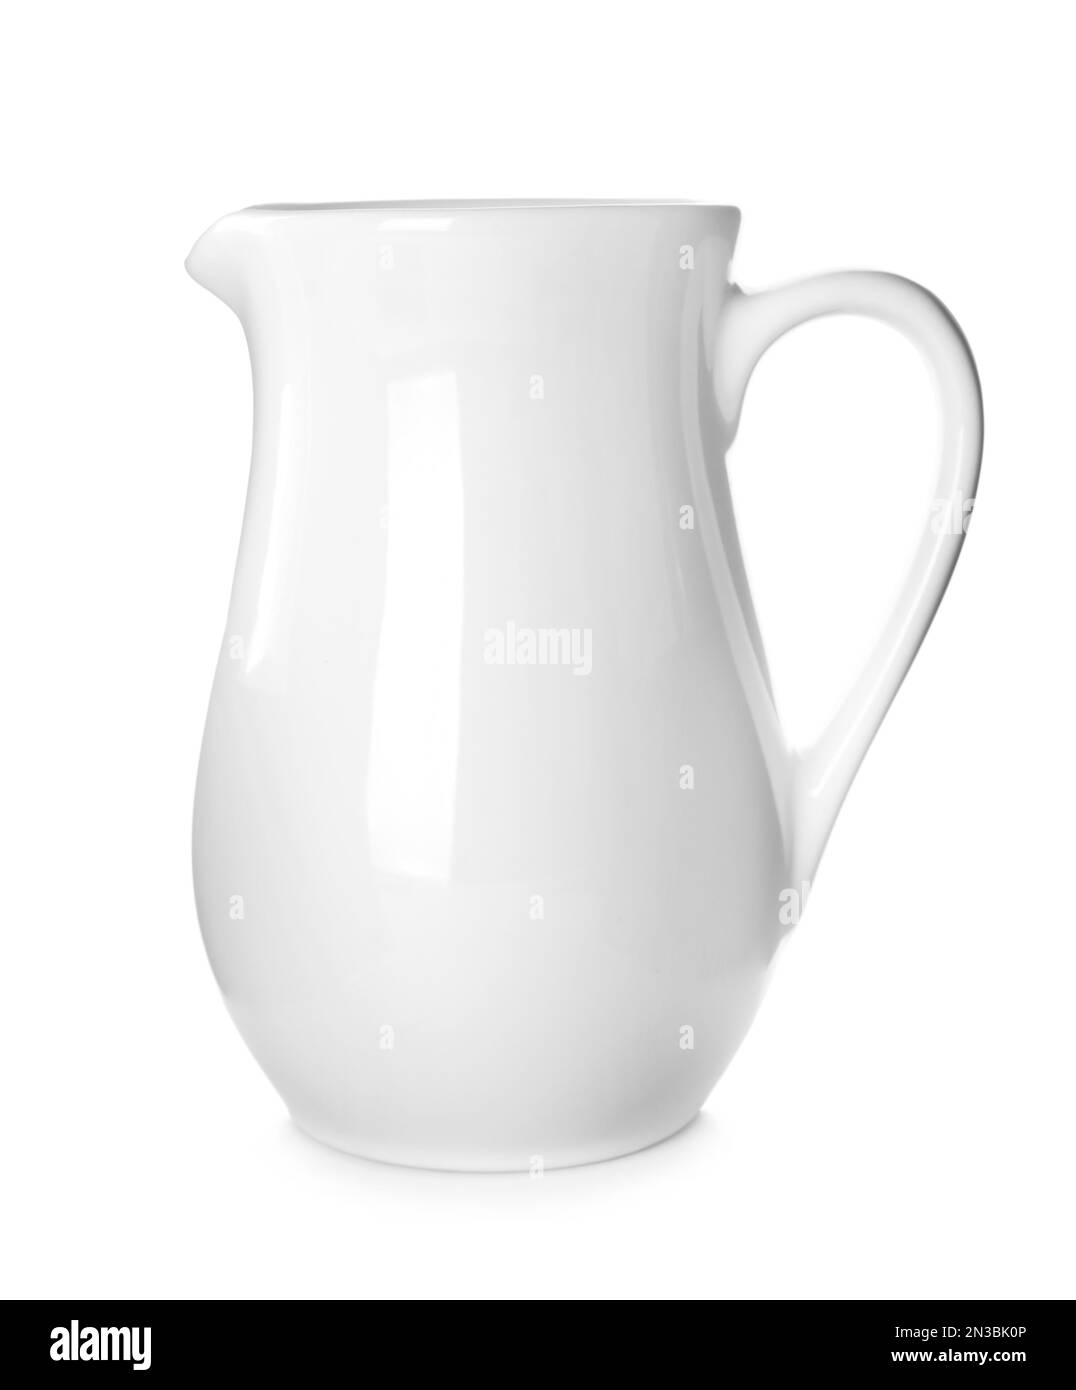 Ceramic Pitcher with Lid, 200ml